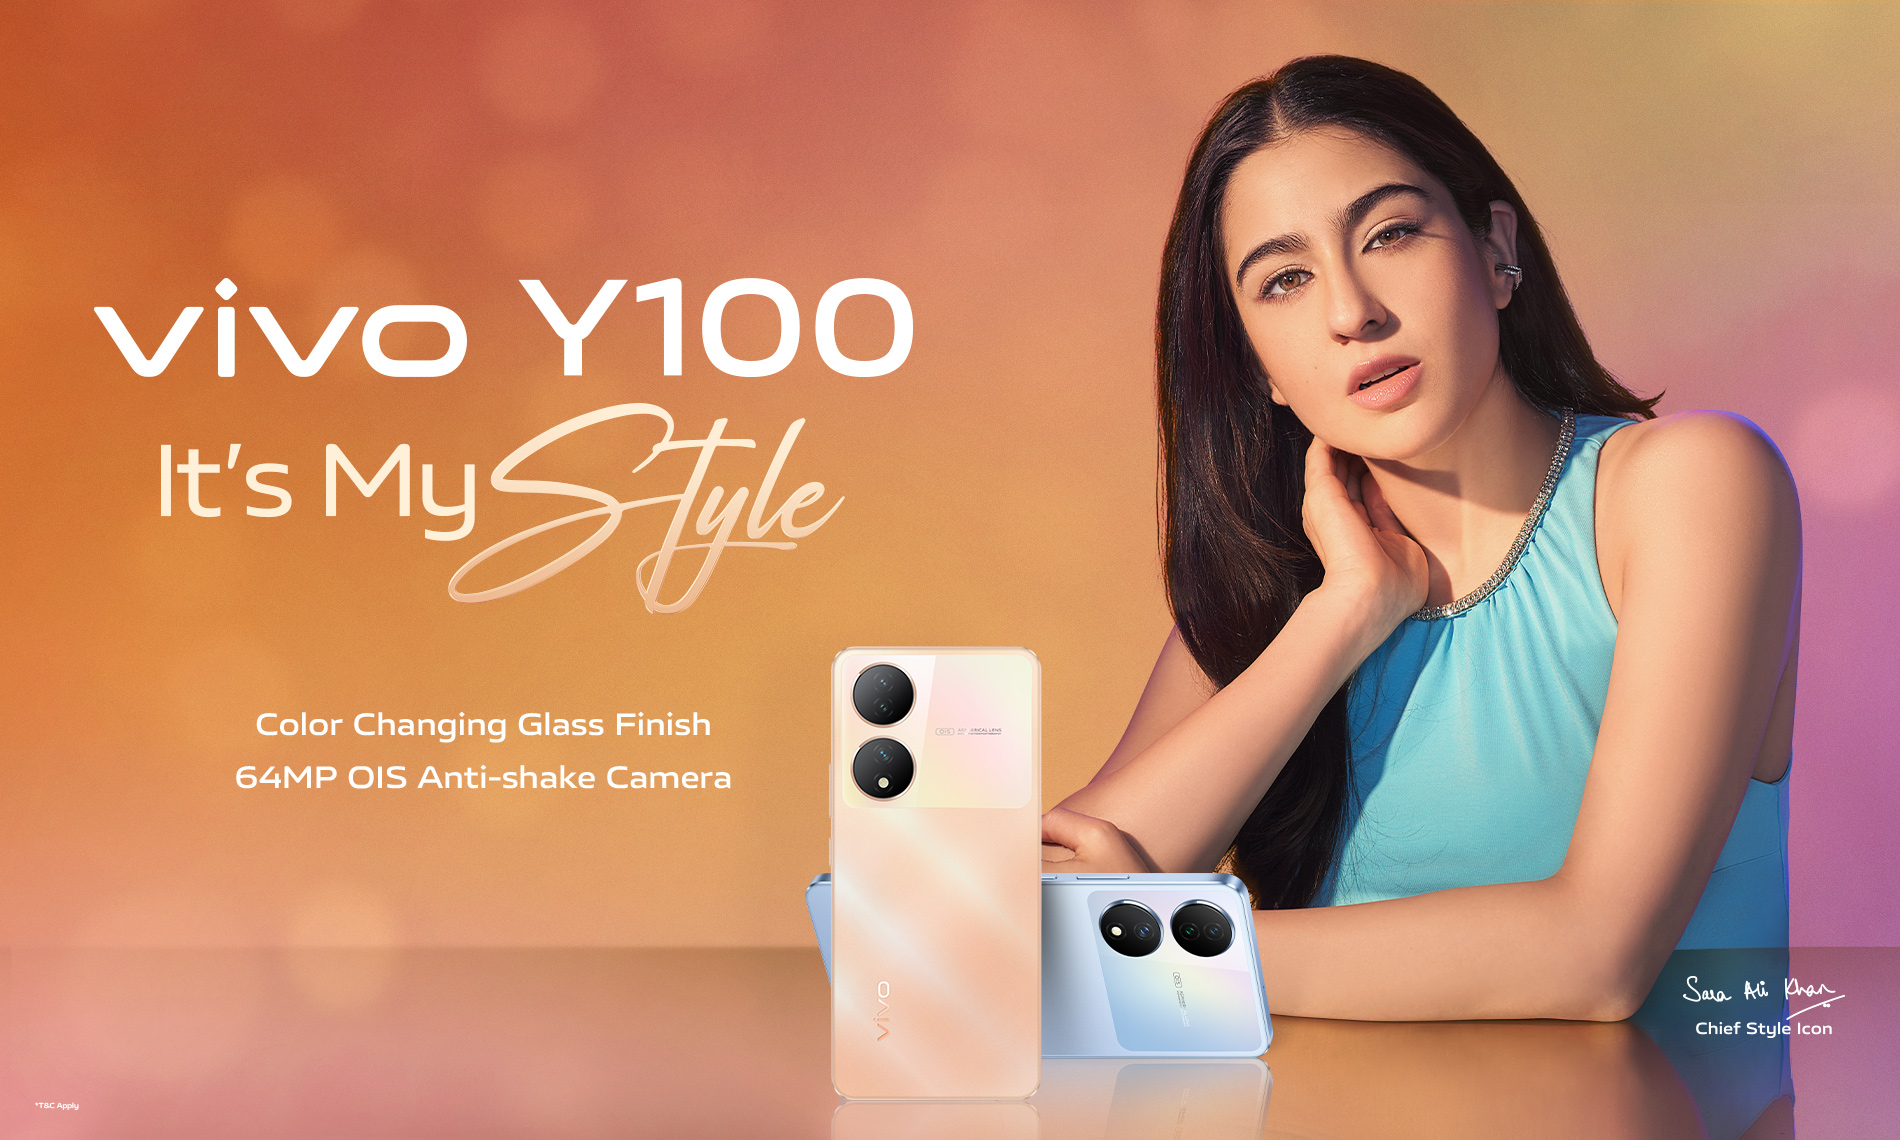 vivo launches Y100, the first premium Y-series smartphone with two color-changing variants in India